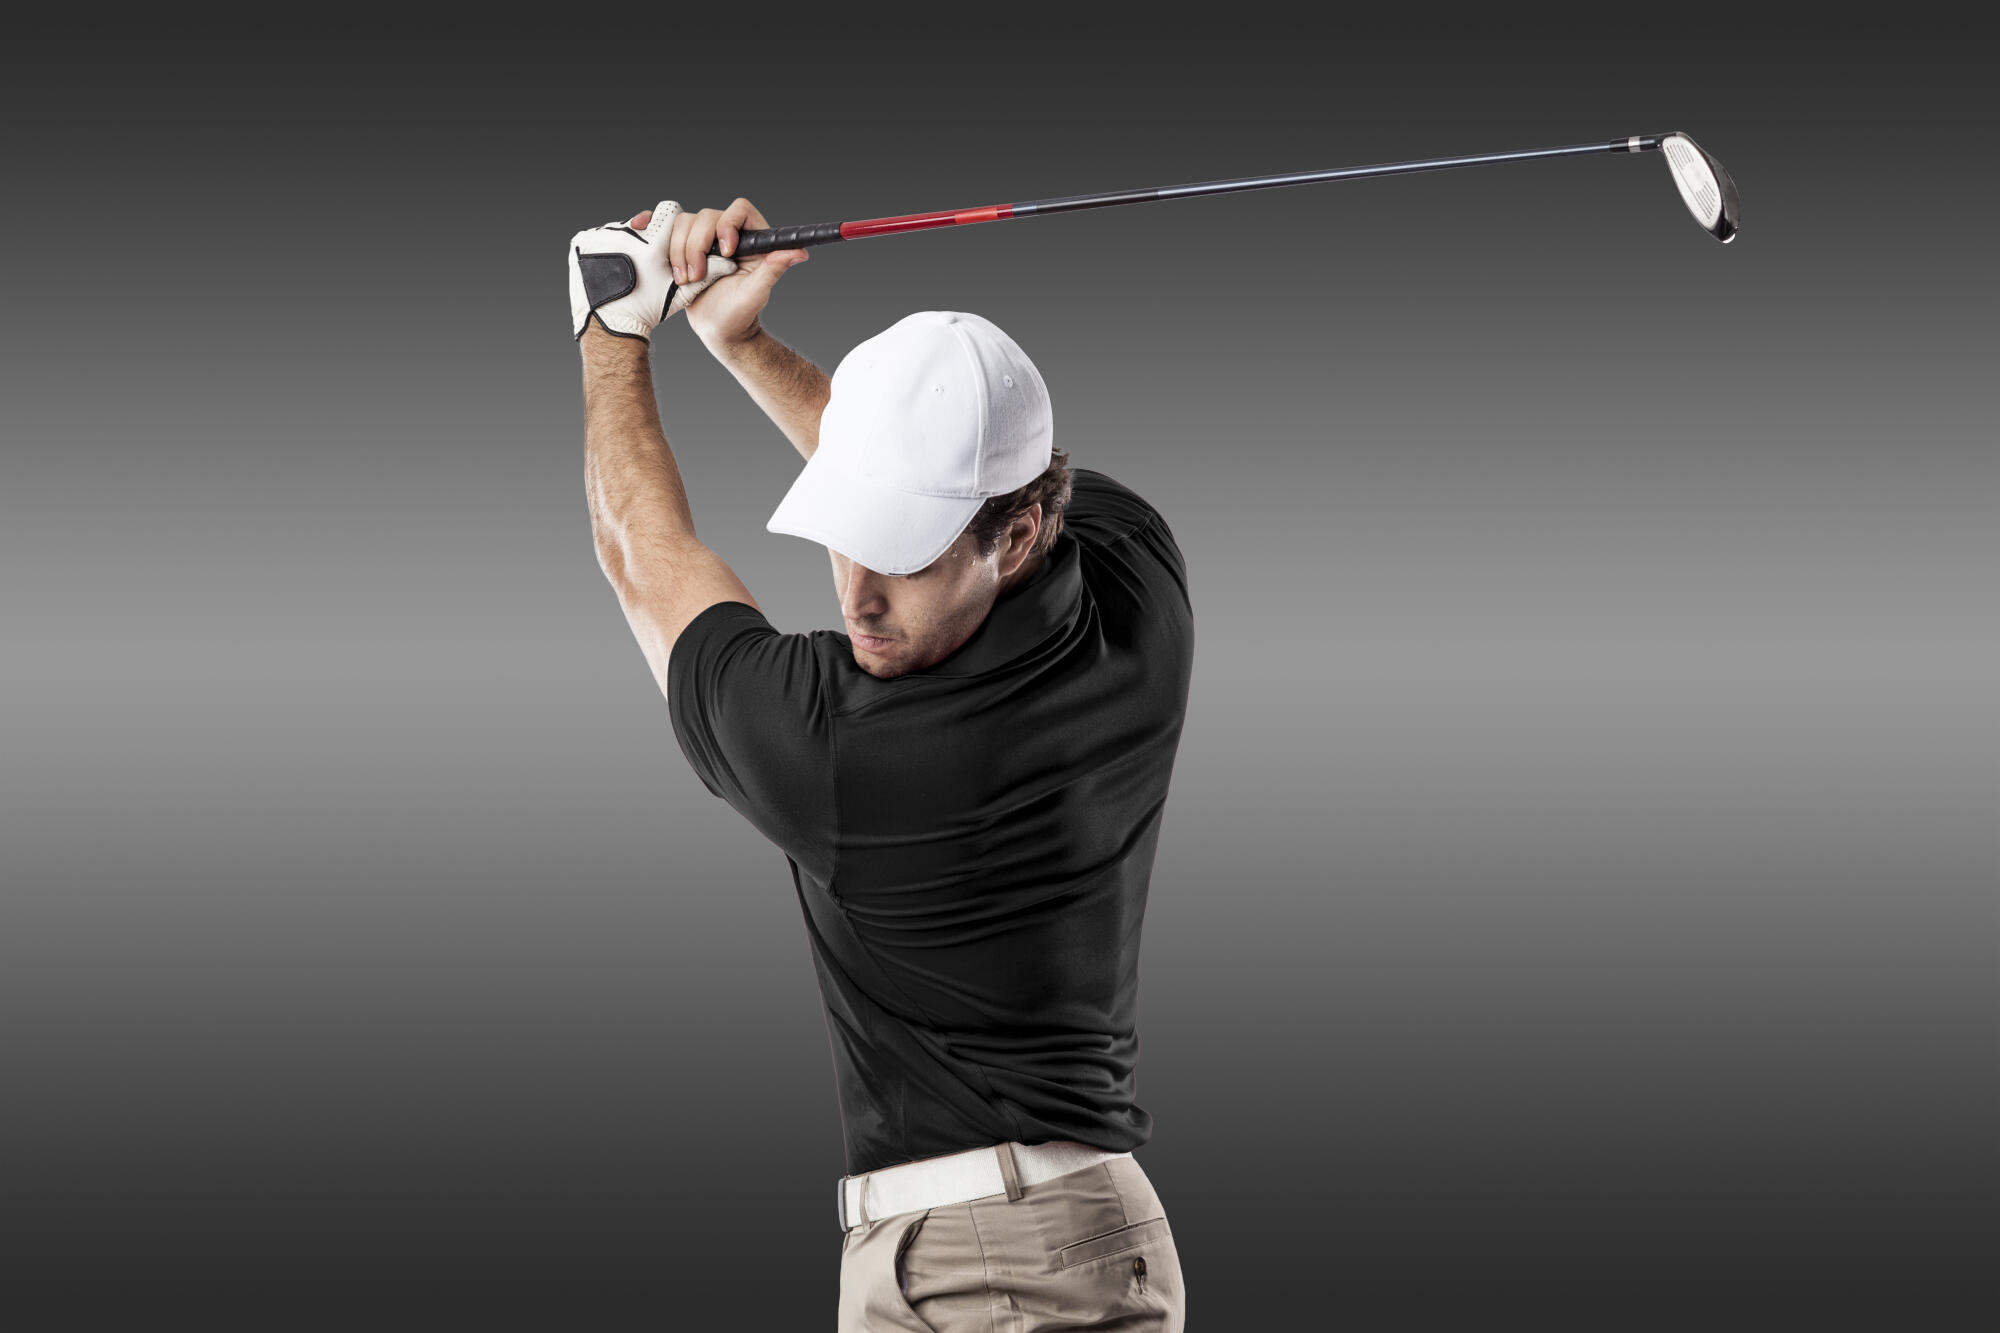 Golf Tips: How to Drive a Golf Ball for Maximum Distance